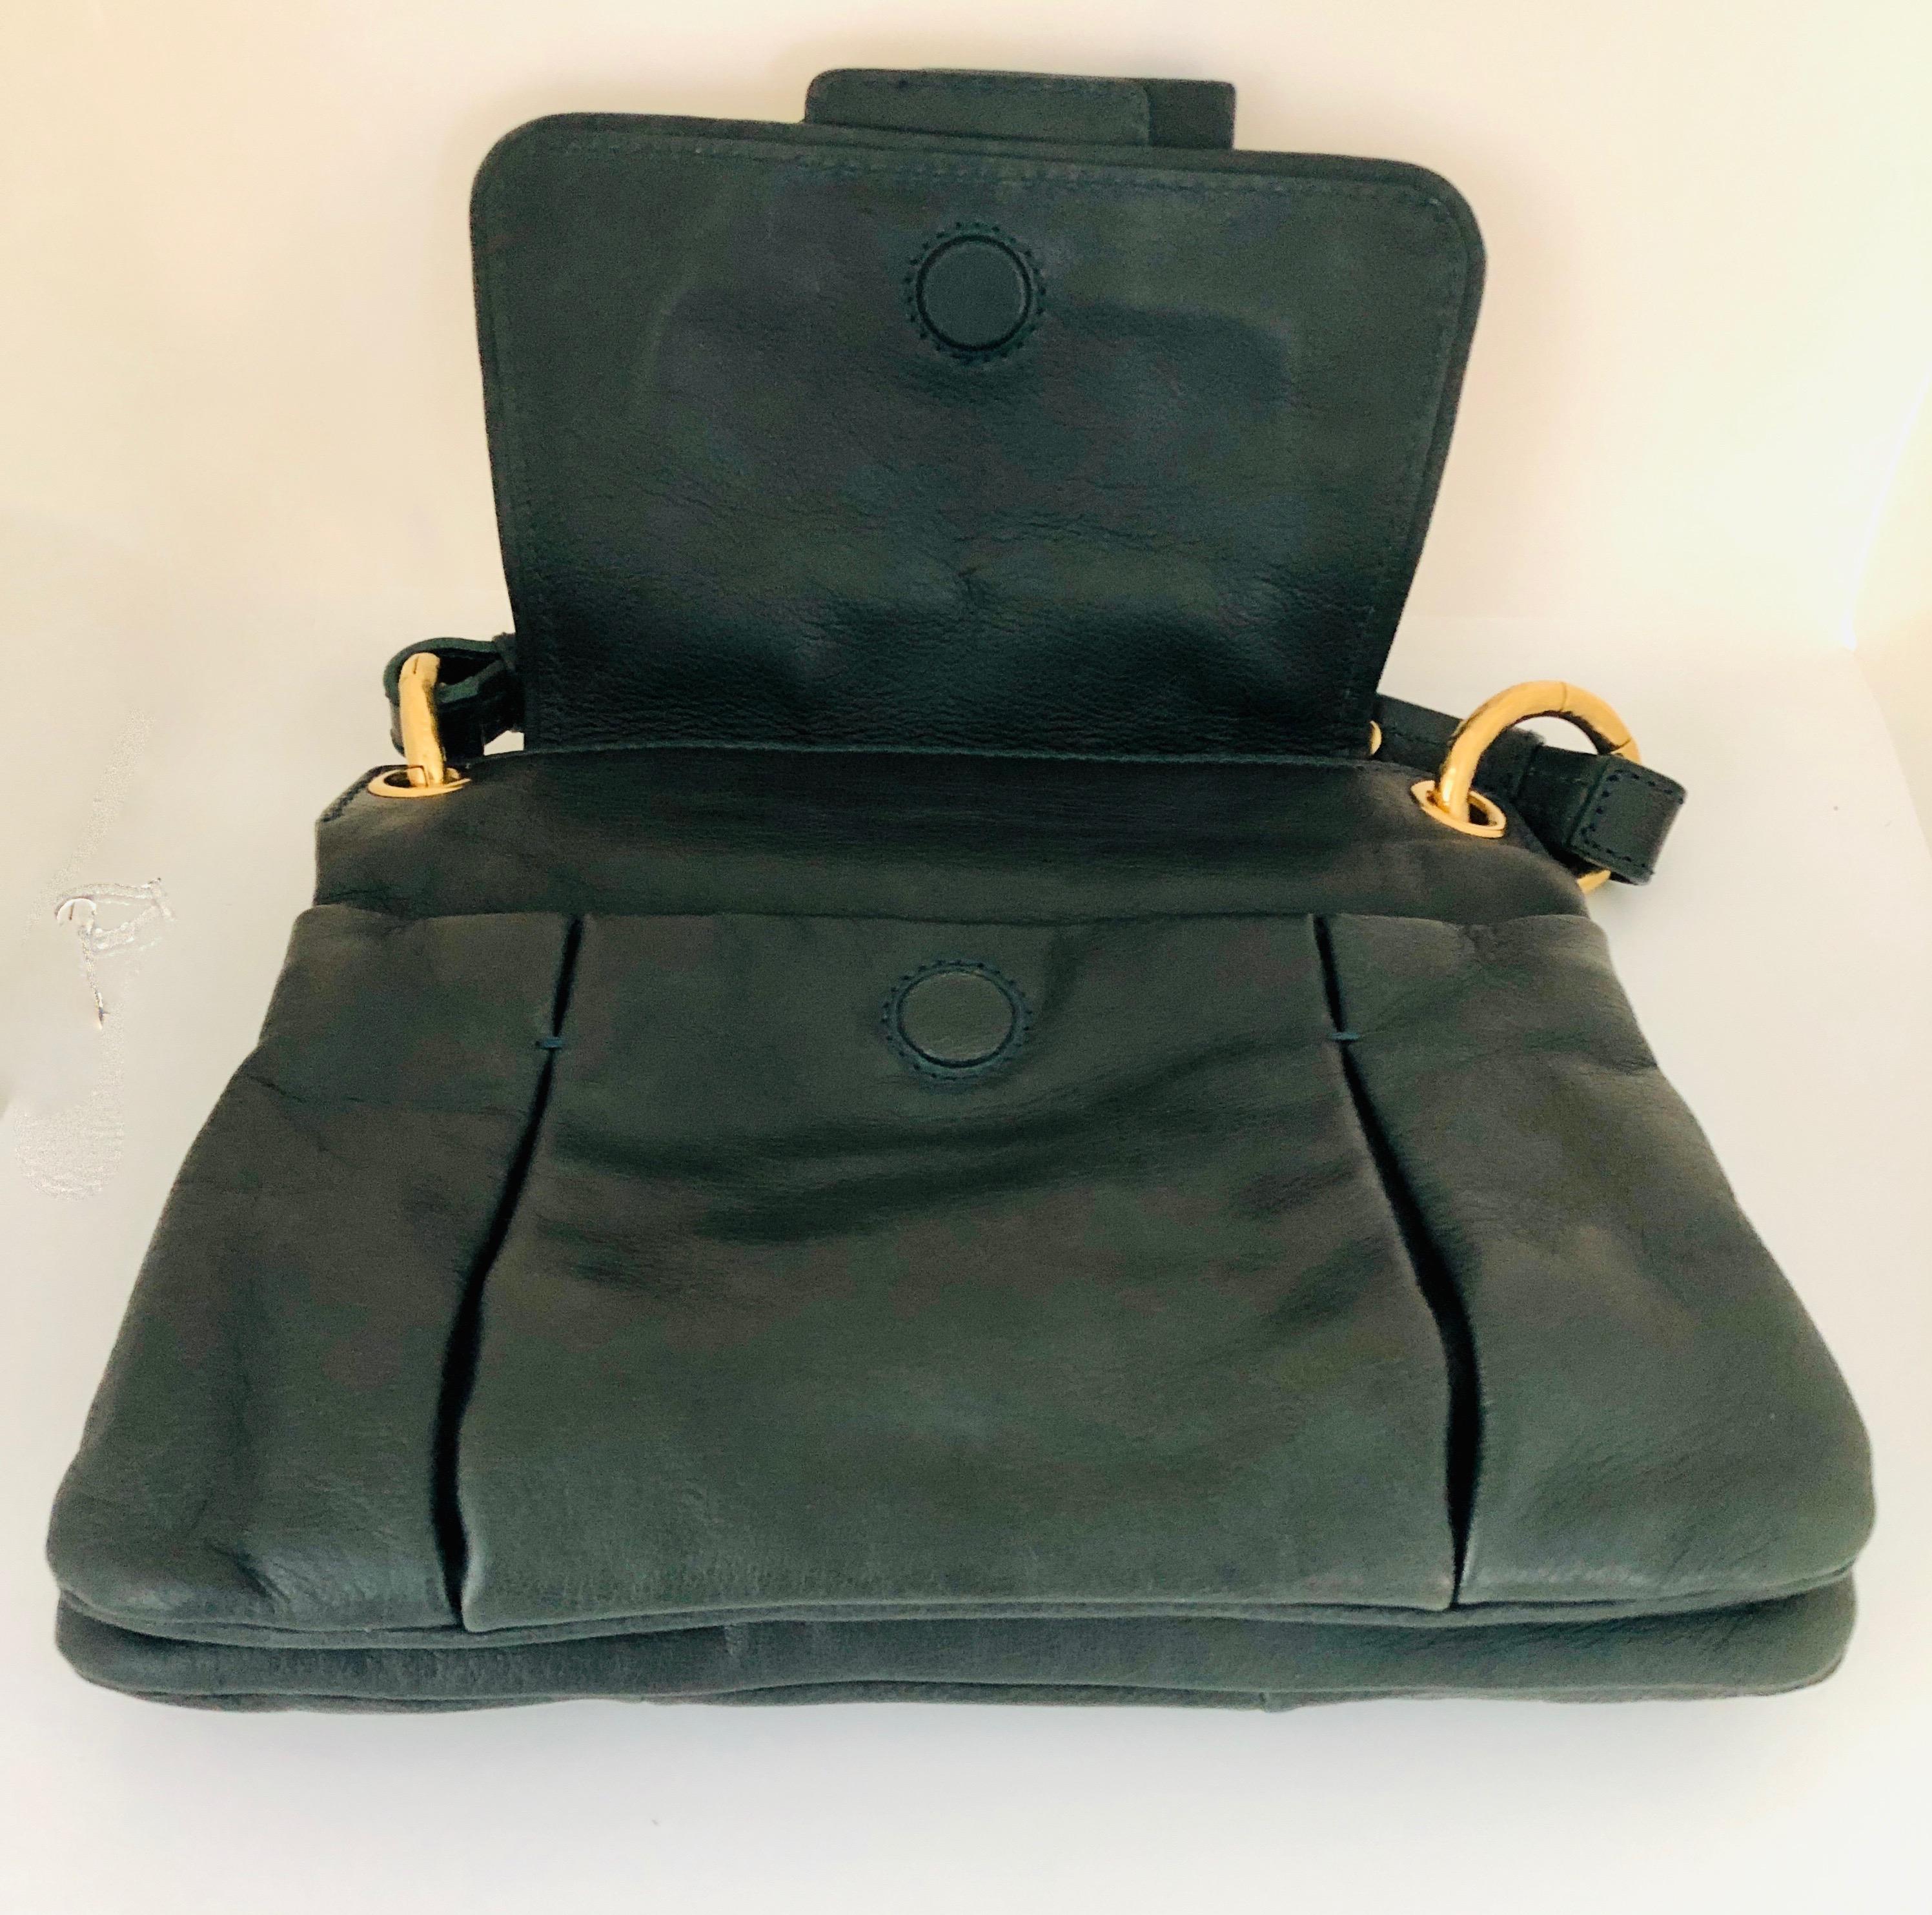 Marc Jacobs Green Leather Double Saddlebag w/ Top Handle & Metal / Jewel Accents 6